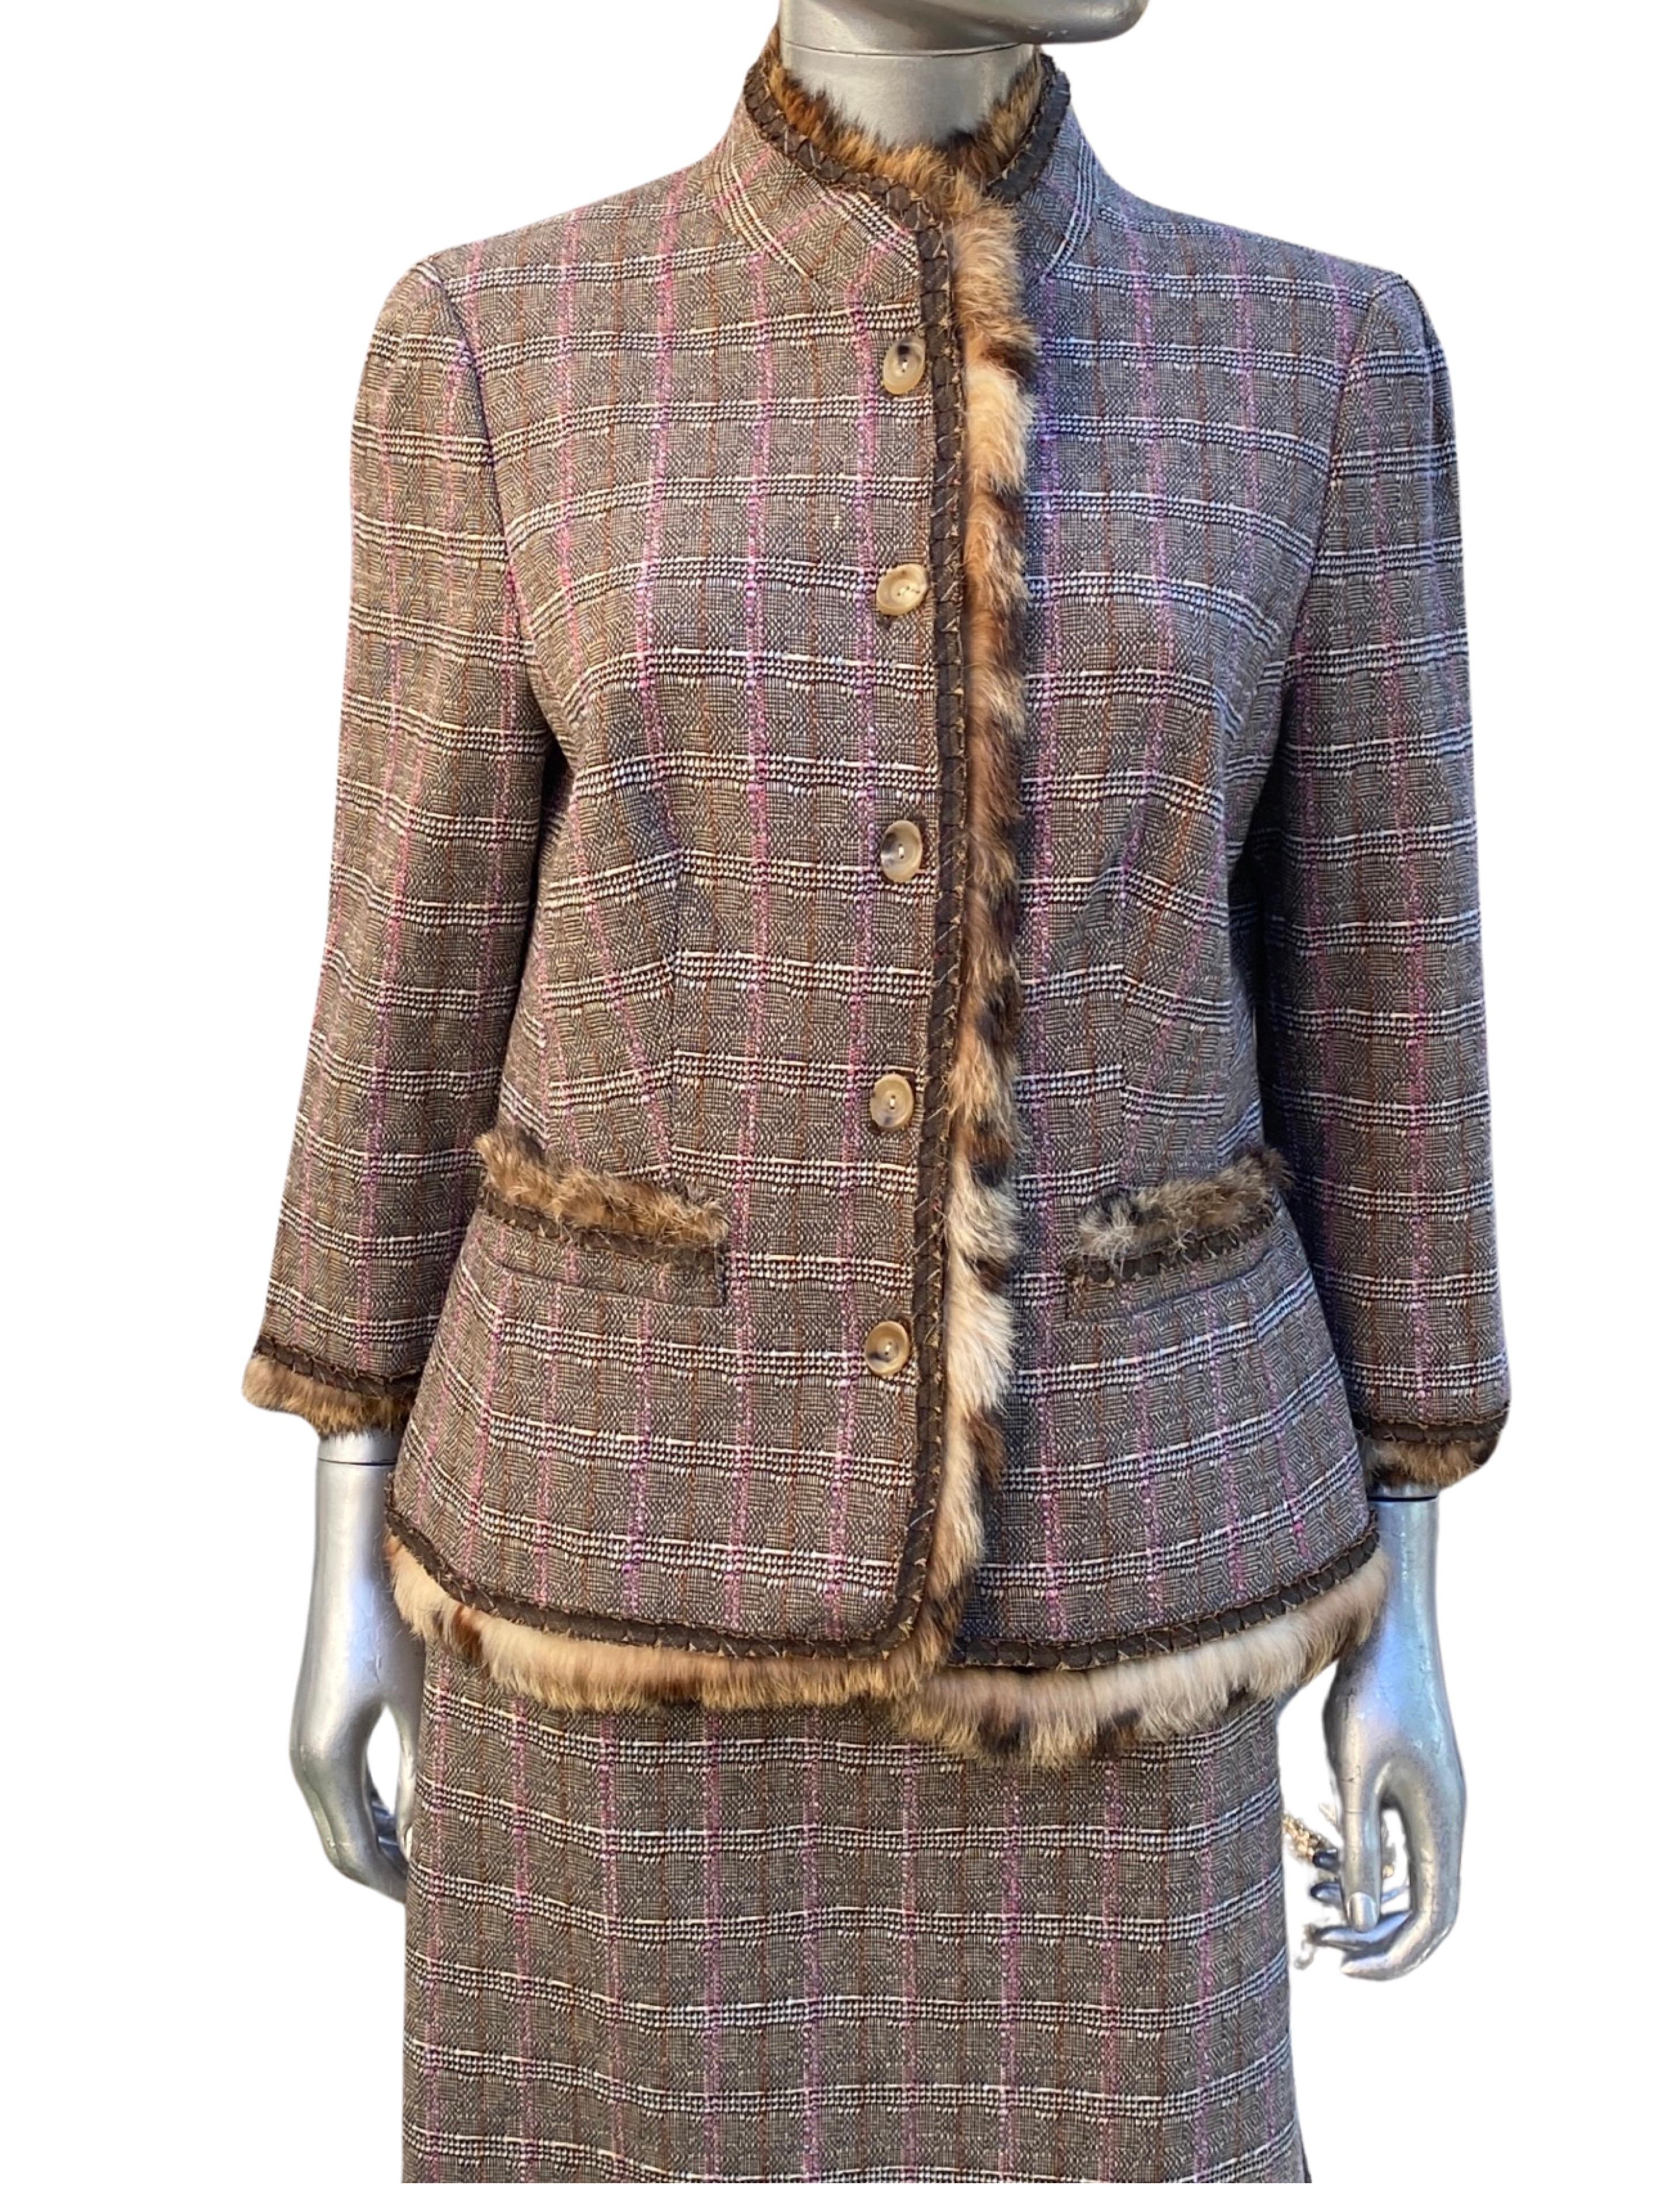 Gray Worth New York Chic Brown/Lilac Plaid Suit w/  Fur Trim Jacket Size 10/12 For Sale